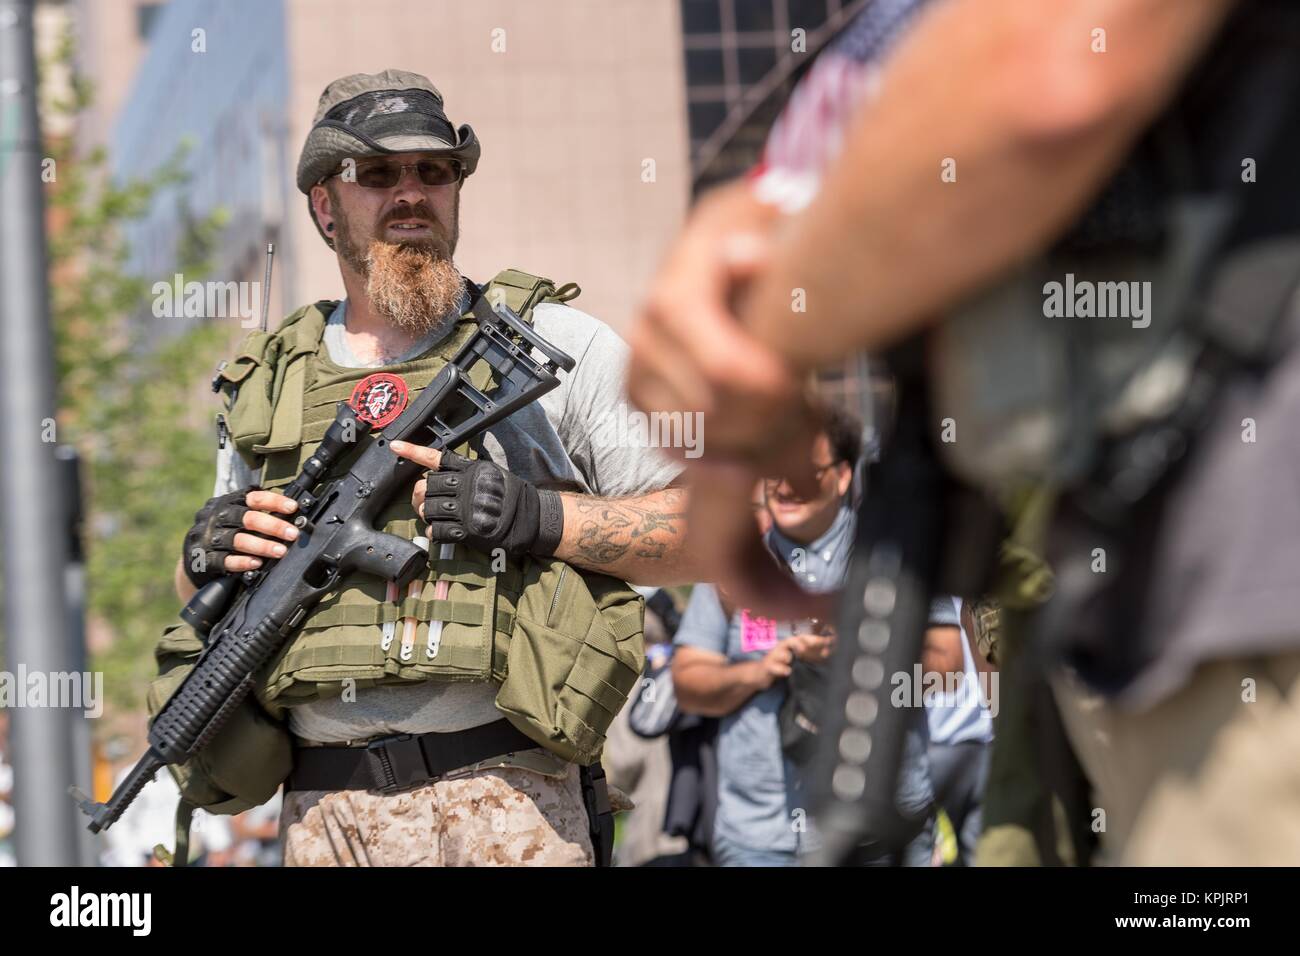 Members of an Ohio militia group protest by openly carrying military style semi-automatic weapons downtown near the Republican National Convention July 19, 2016 in Cleveland, Ohio. Stock Photo